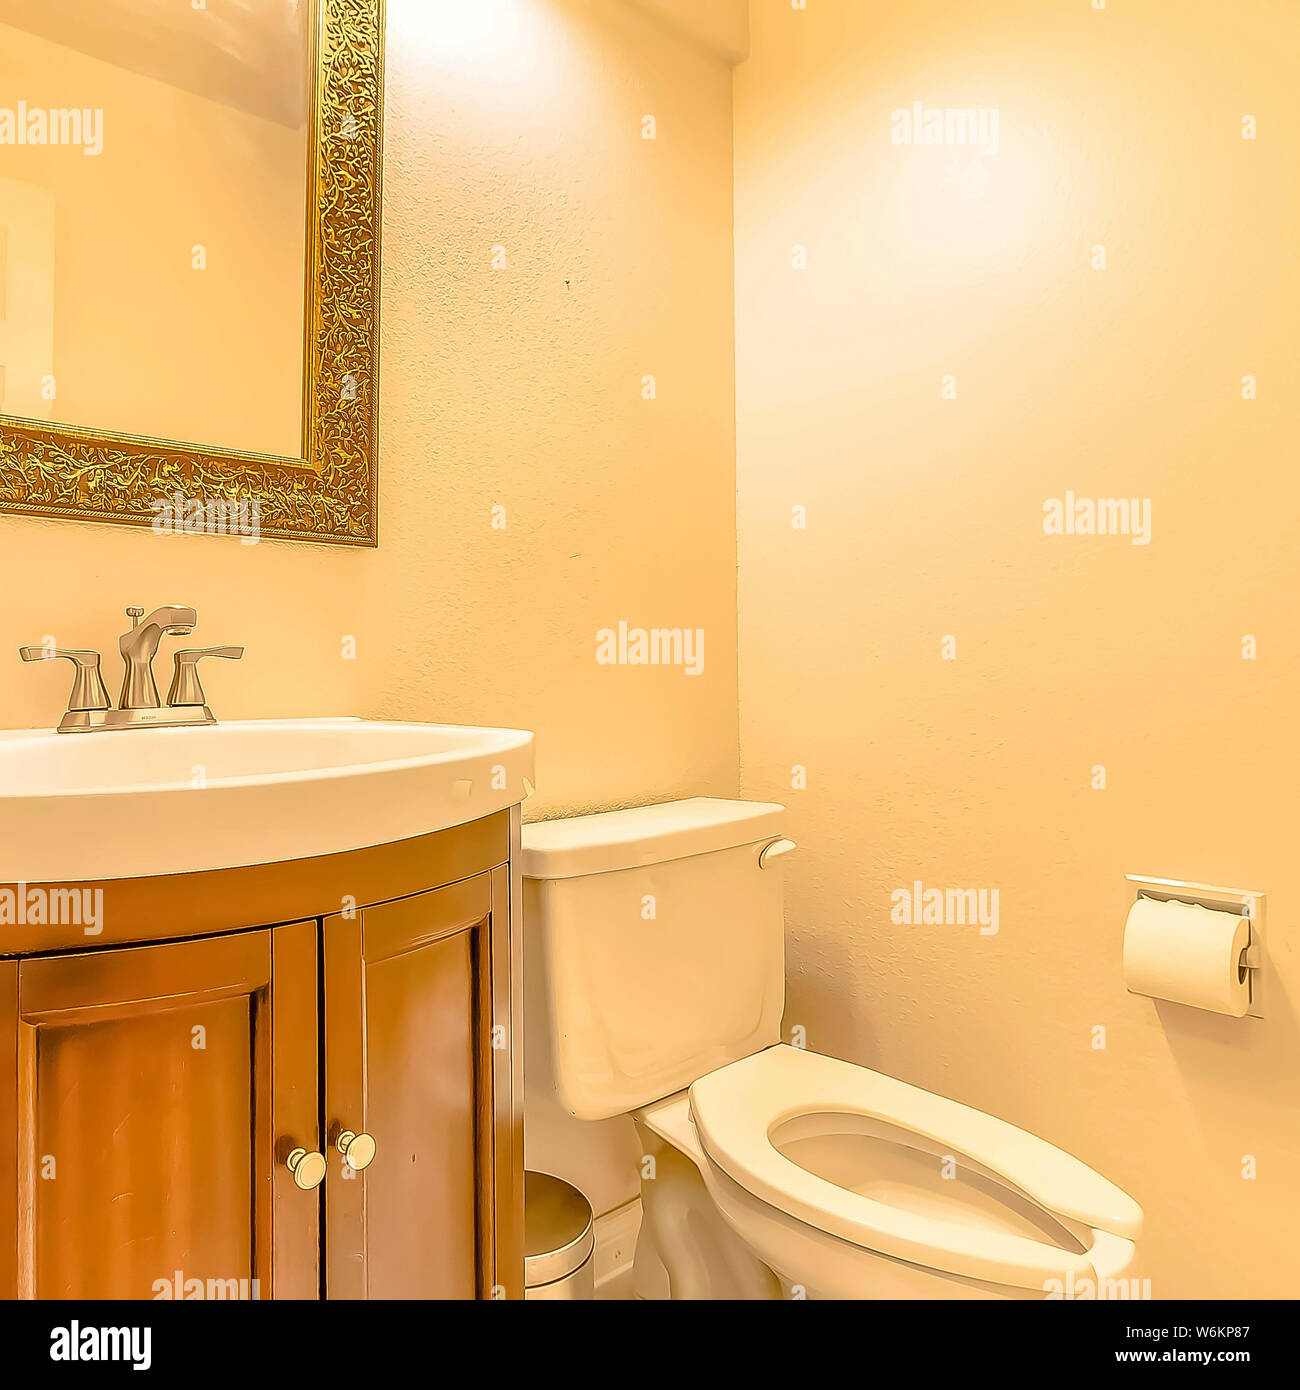 Toilet And Sink Inside The Bathroom Of A House With Cream Colored